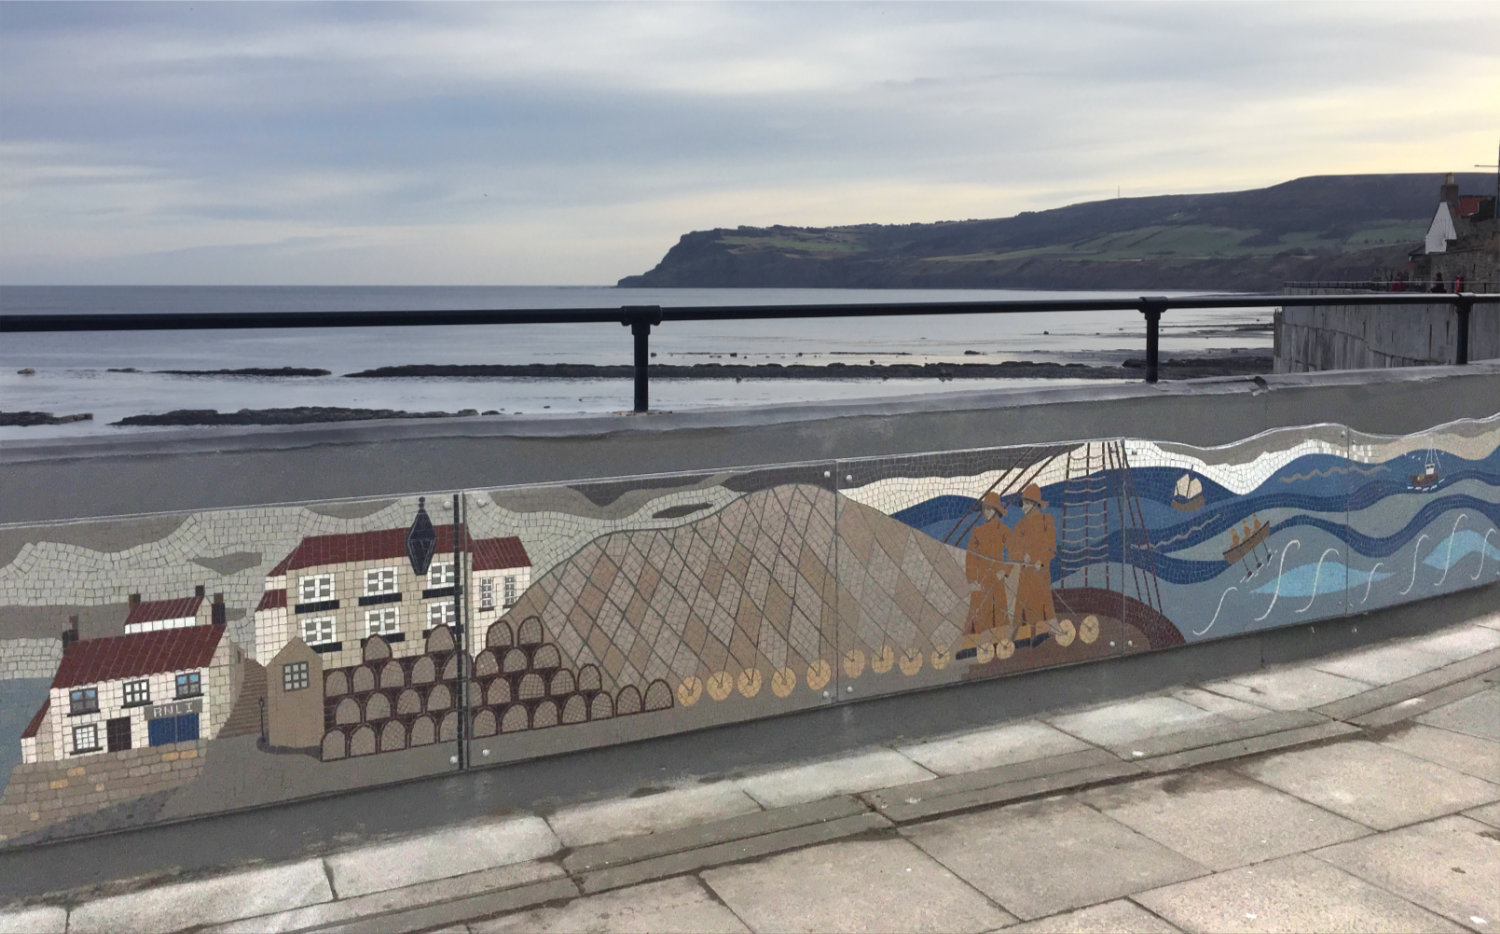 A section of the sea wall artwork